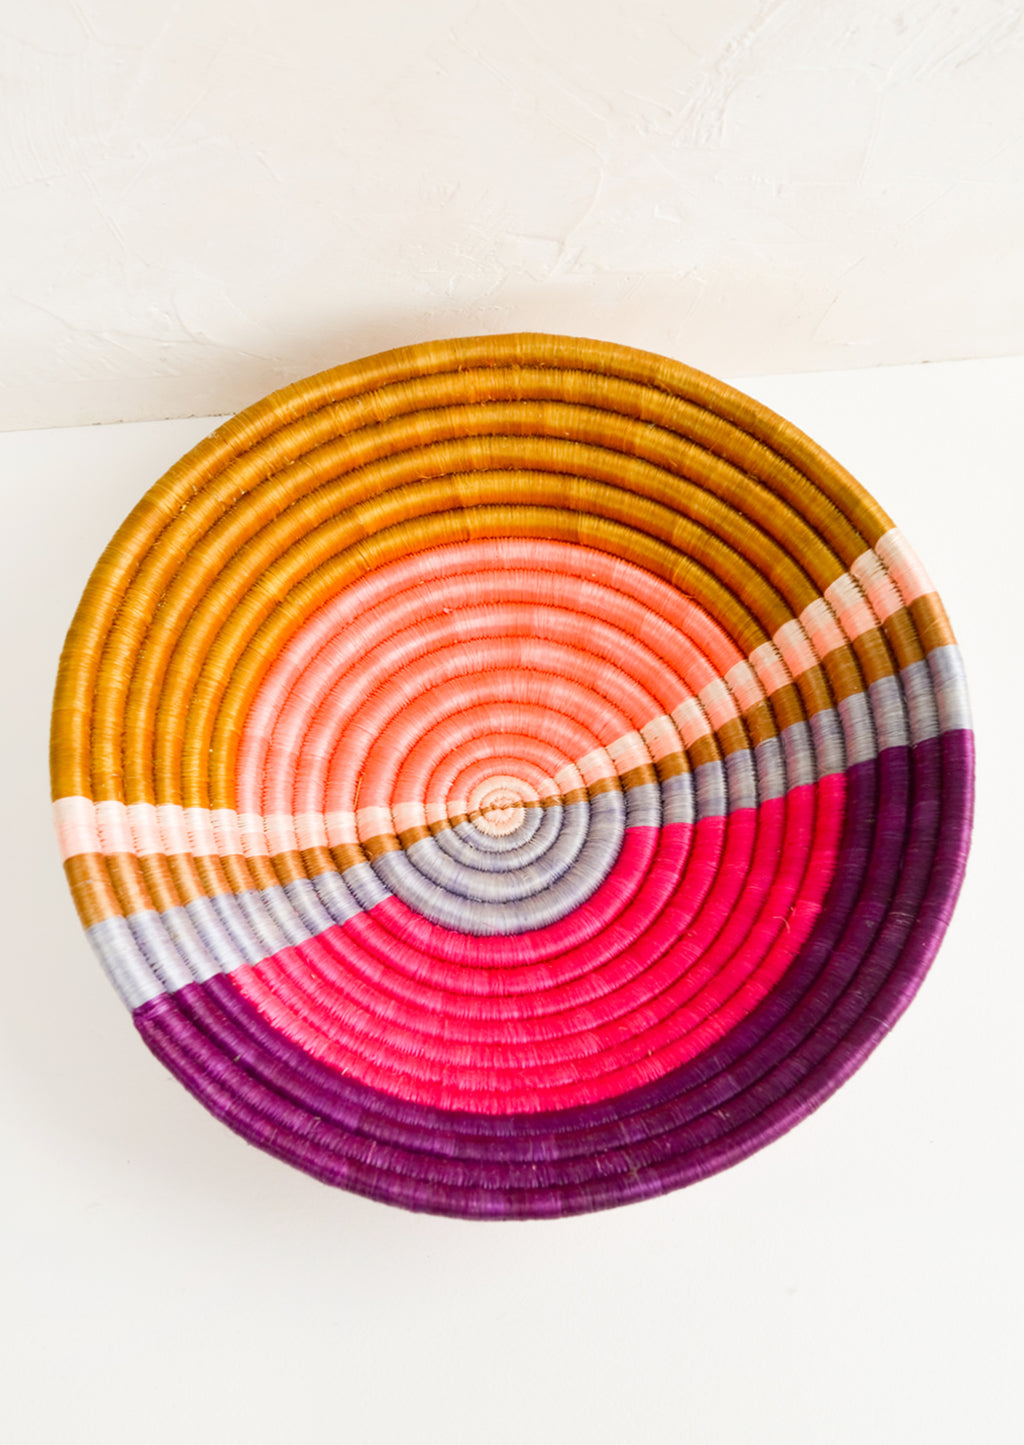 1: A round colorful woven sweetgrass basket with multicolor sunset design.